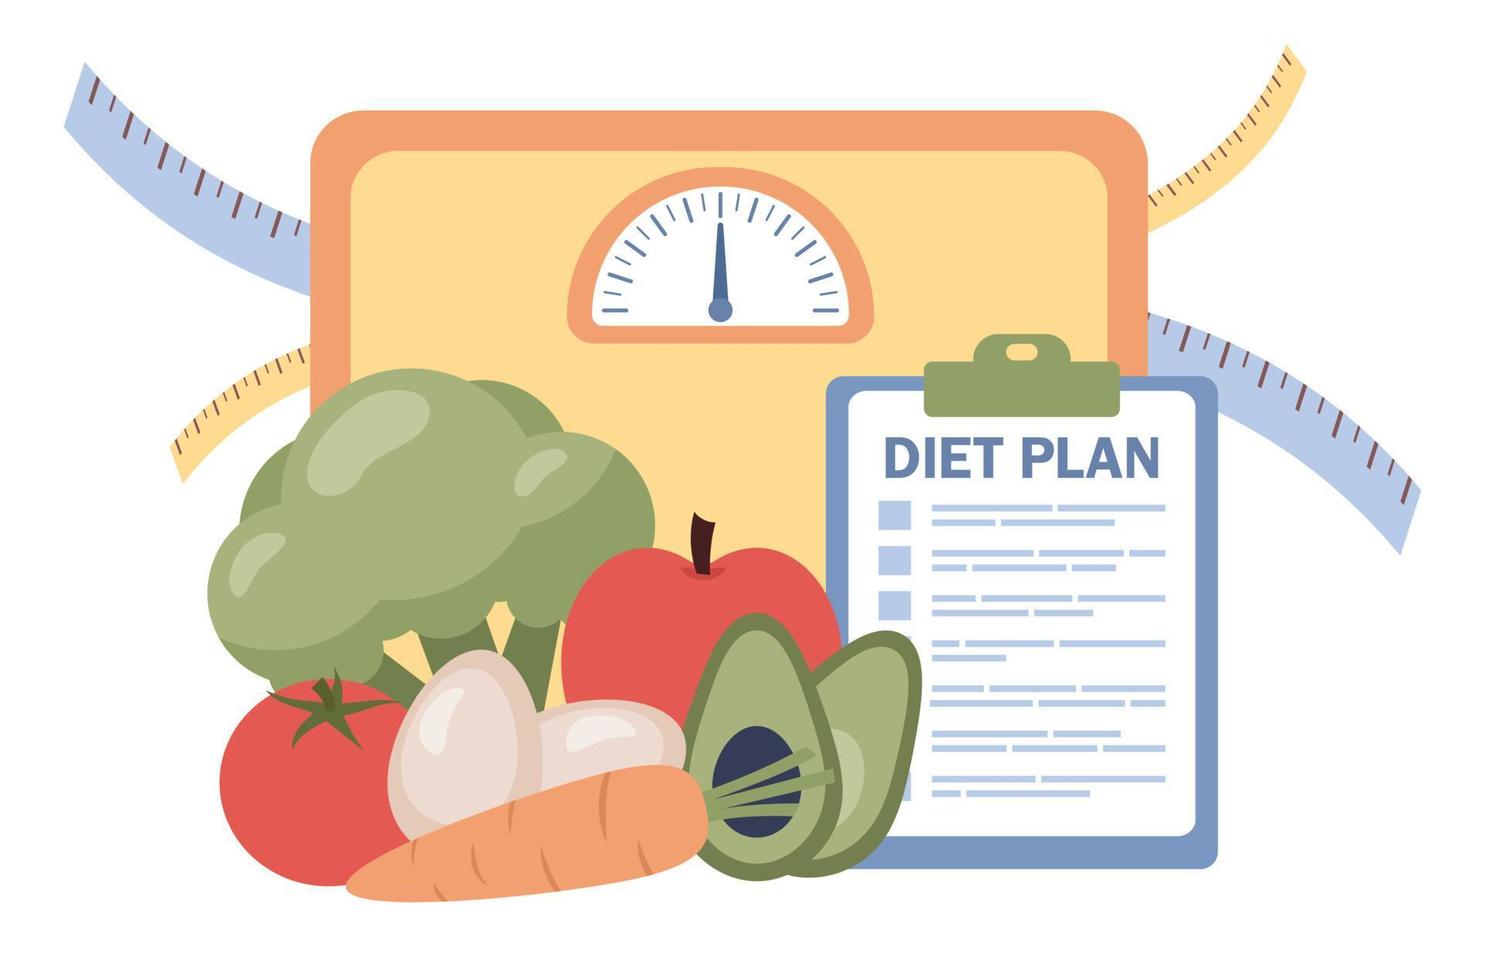 Diet plan with healthy food. Nutritionist concept. Weight loss, calorie control and physical activity. Vector flat illustration